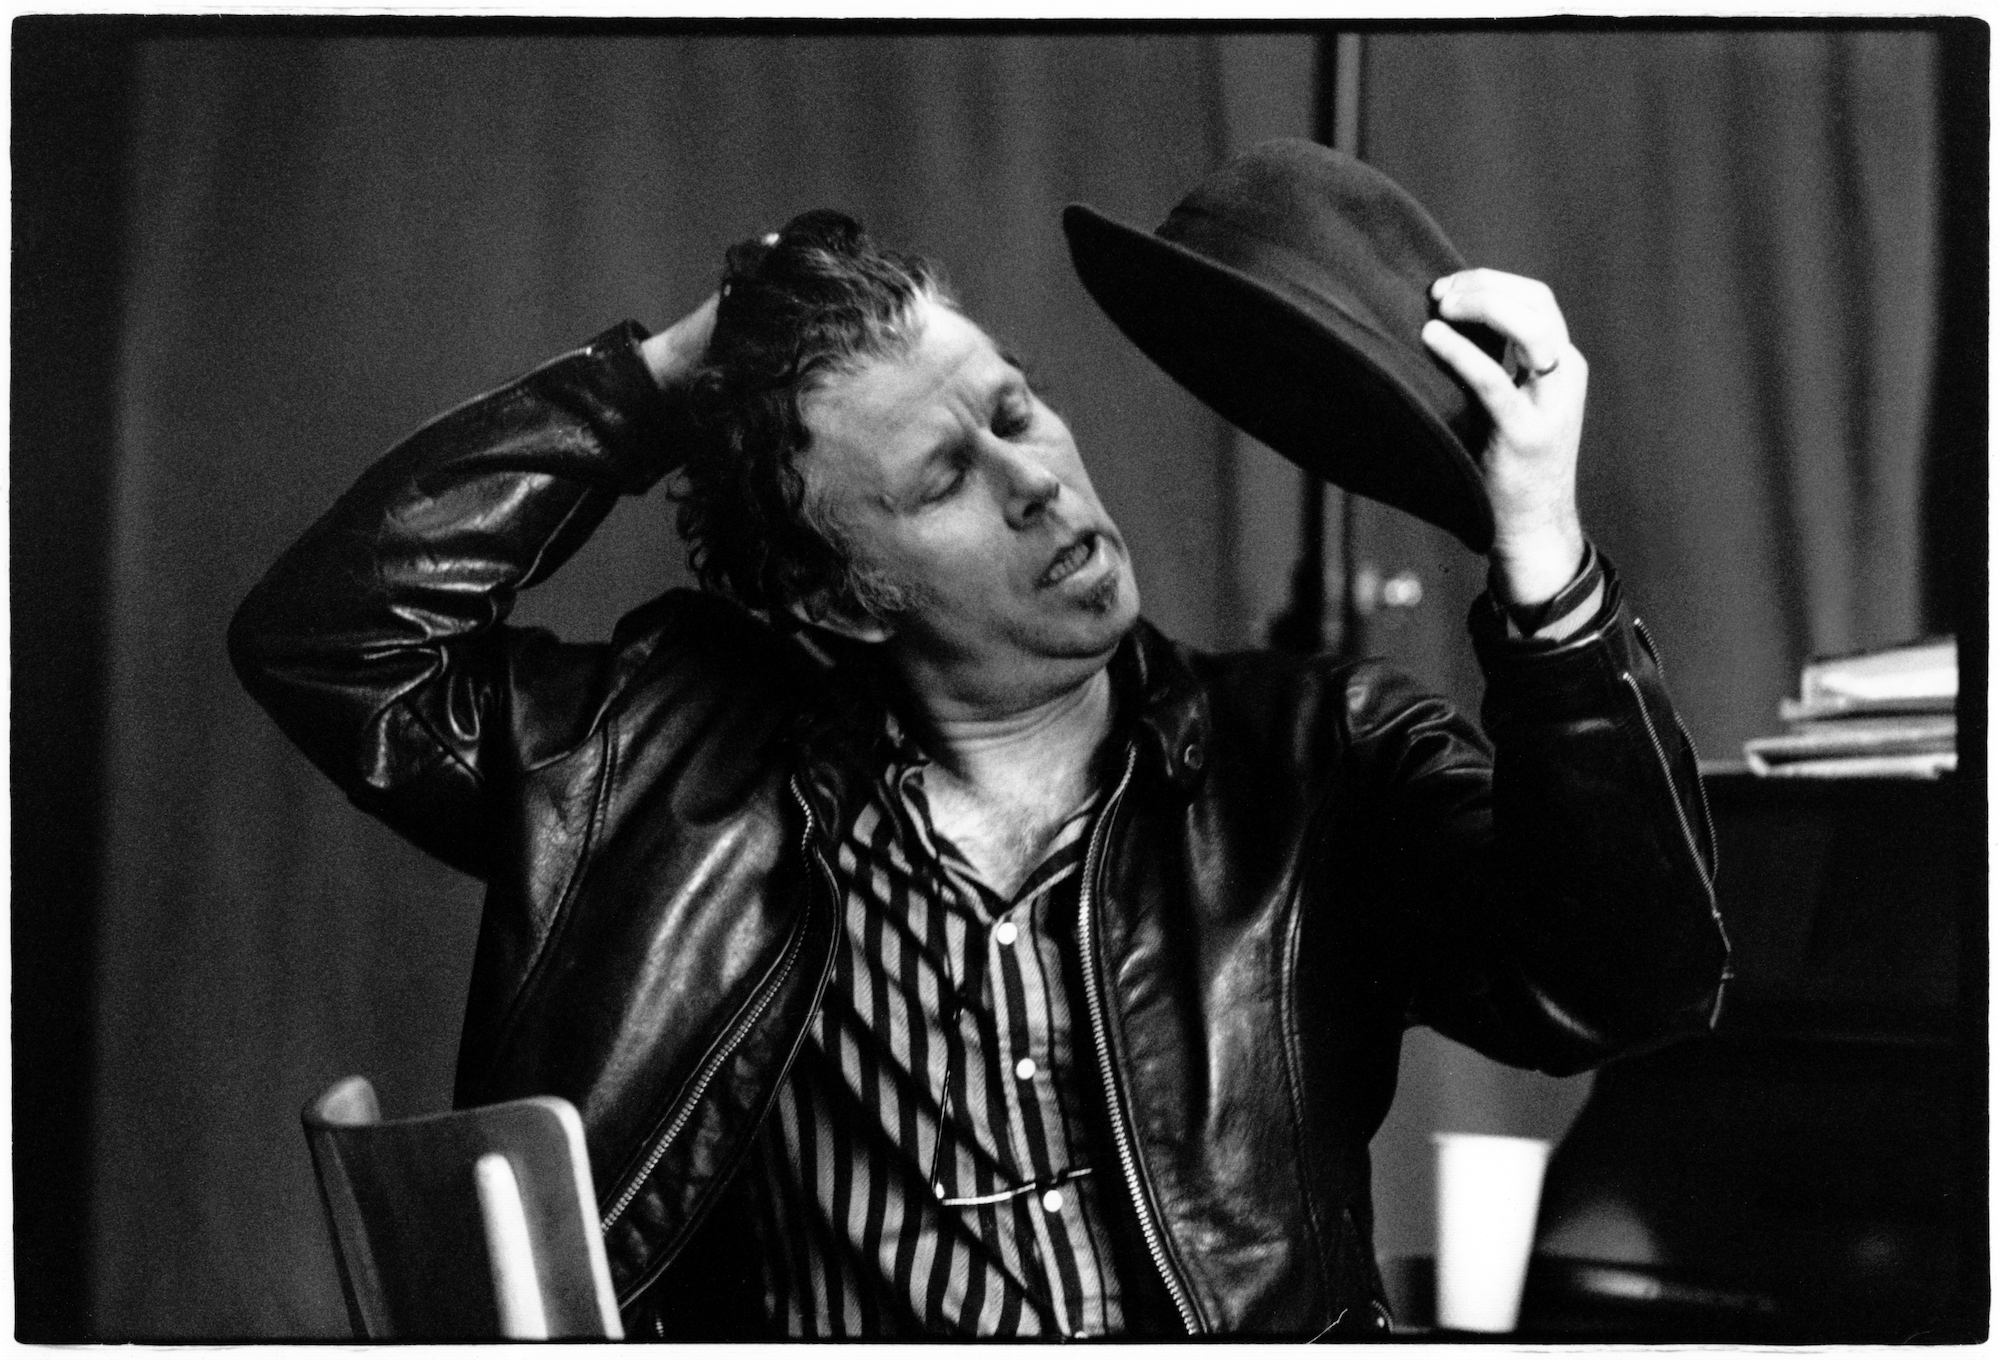 Tom Waits by Thomas Wollenberger